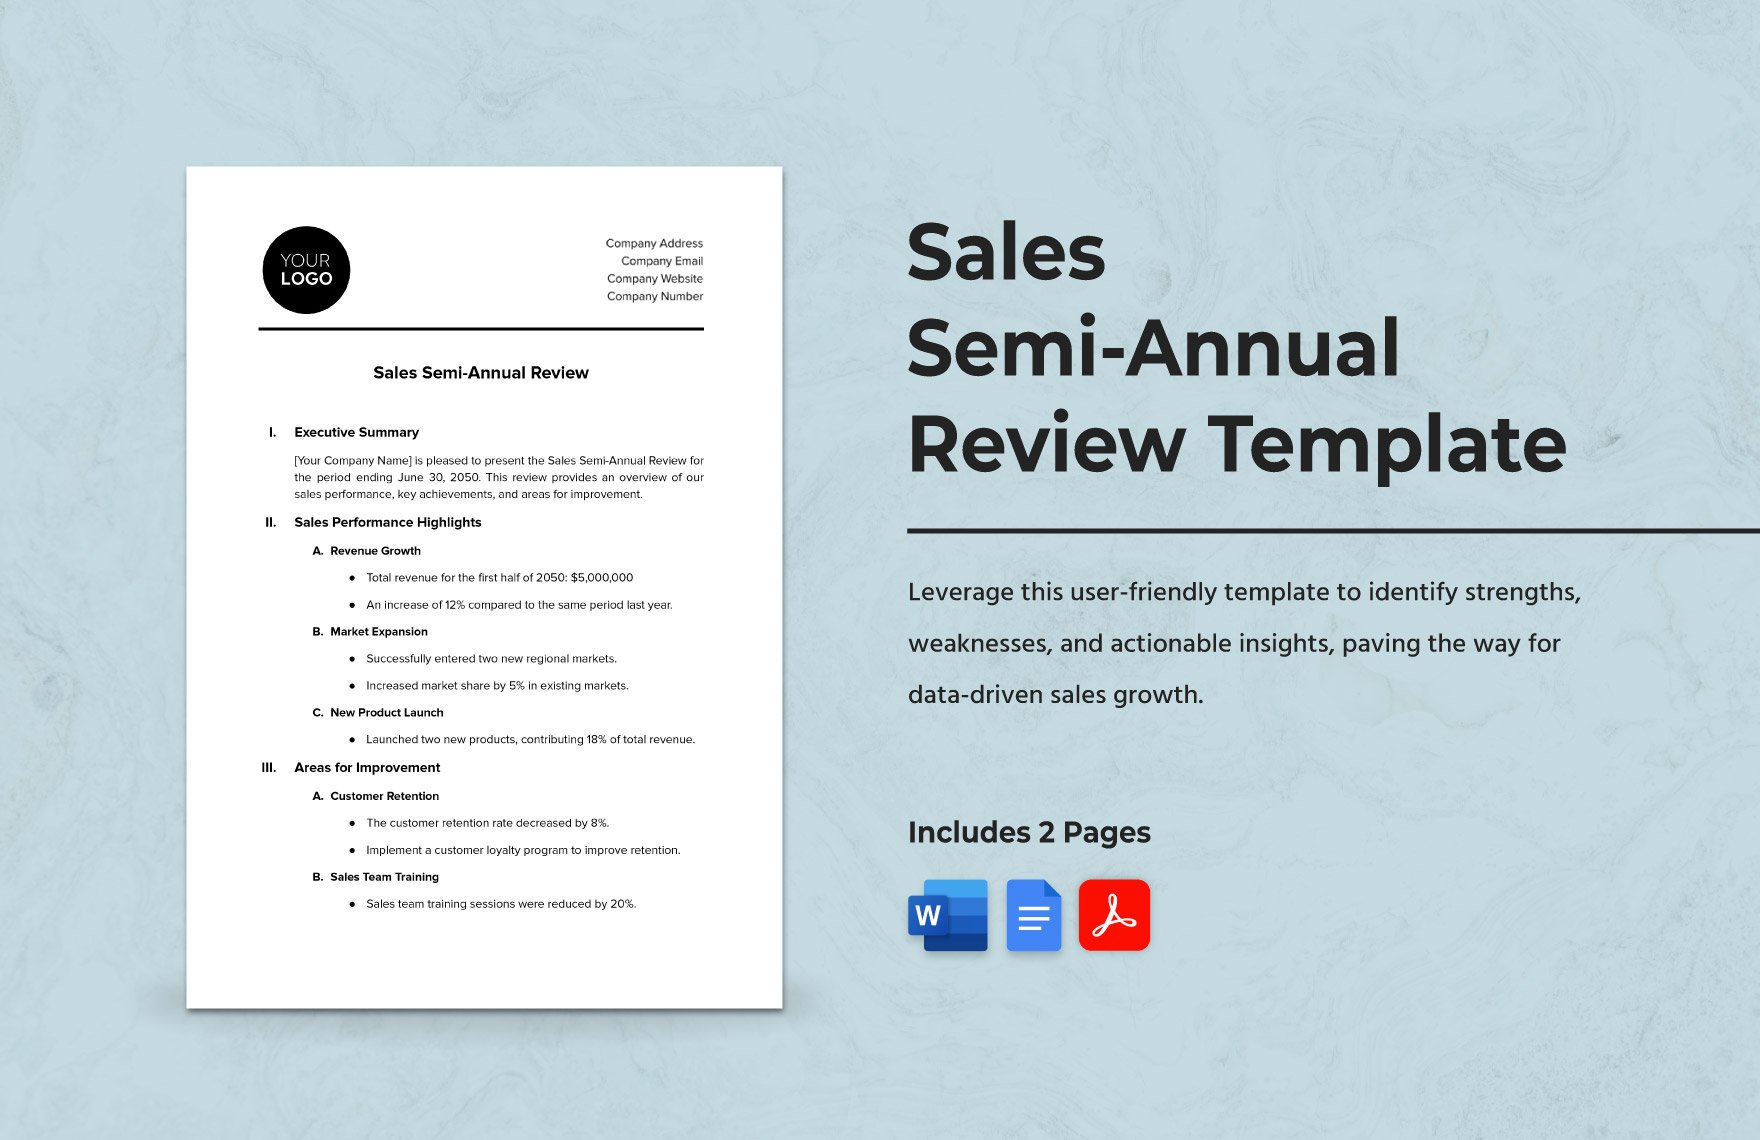 Sales Semi-Annual Review Template in Word, PDF, Google Docs